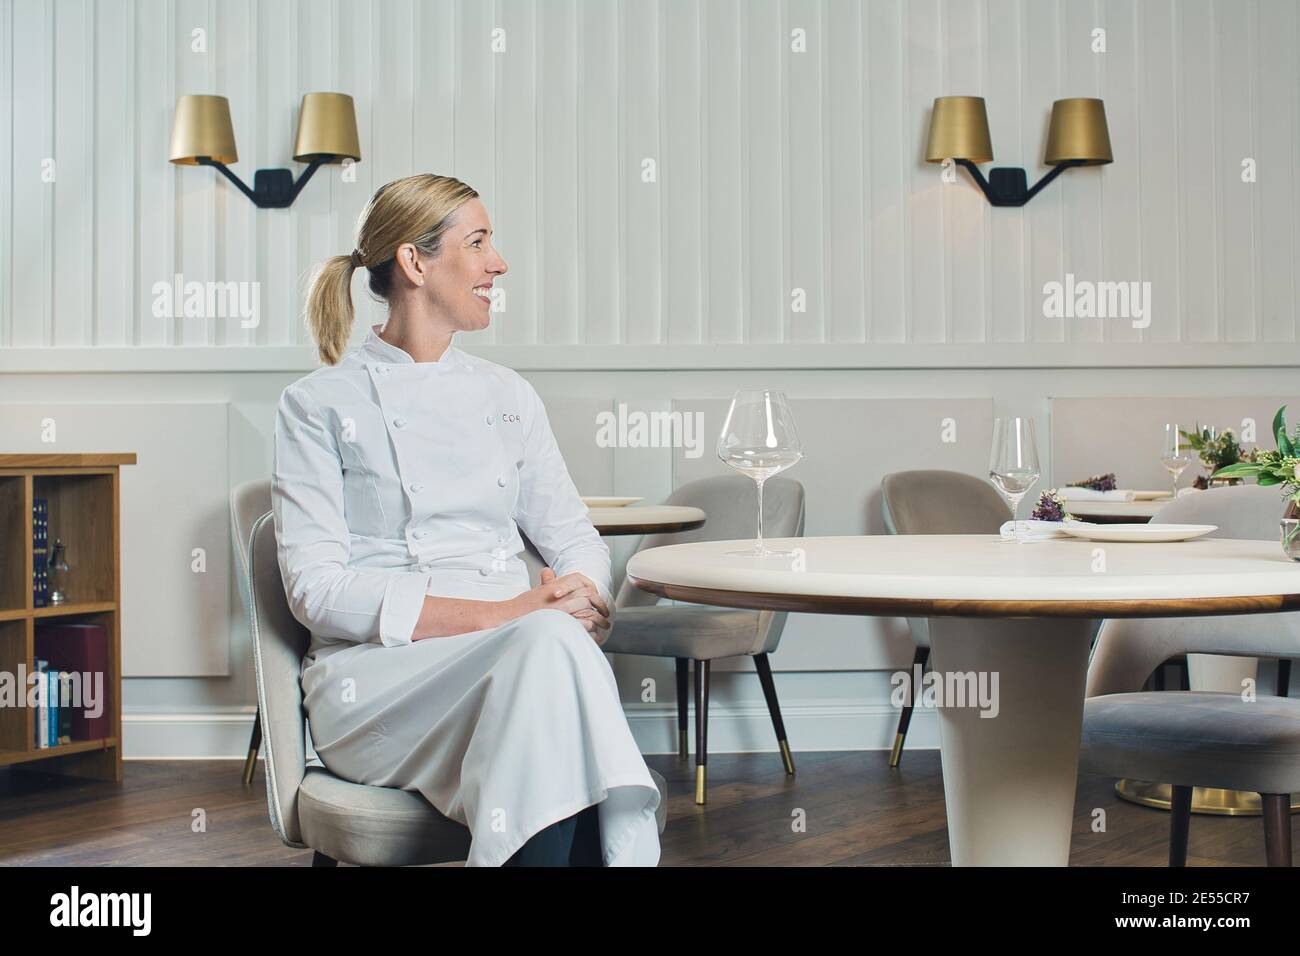 Clare Smyth, chef, poses for a photograph at the Core by Clare Smyth restaurant in the Notting Hill district of London, UK Stock Photo